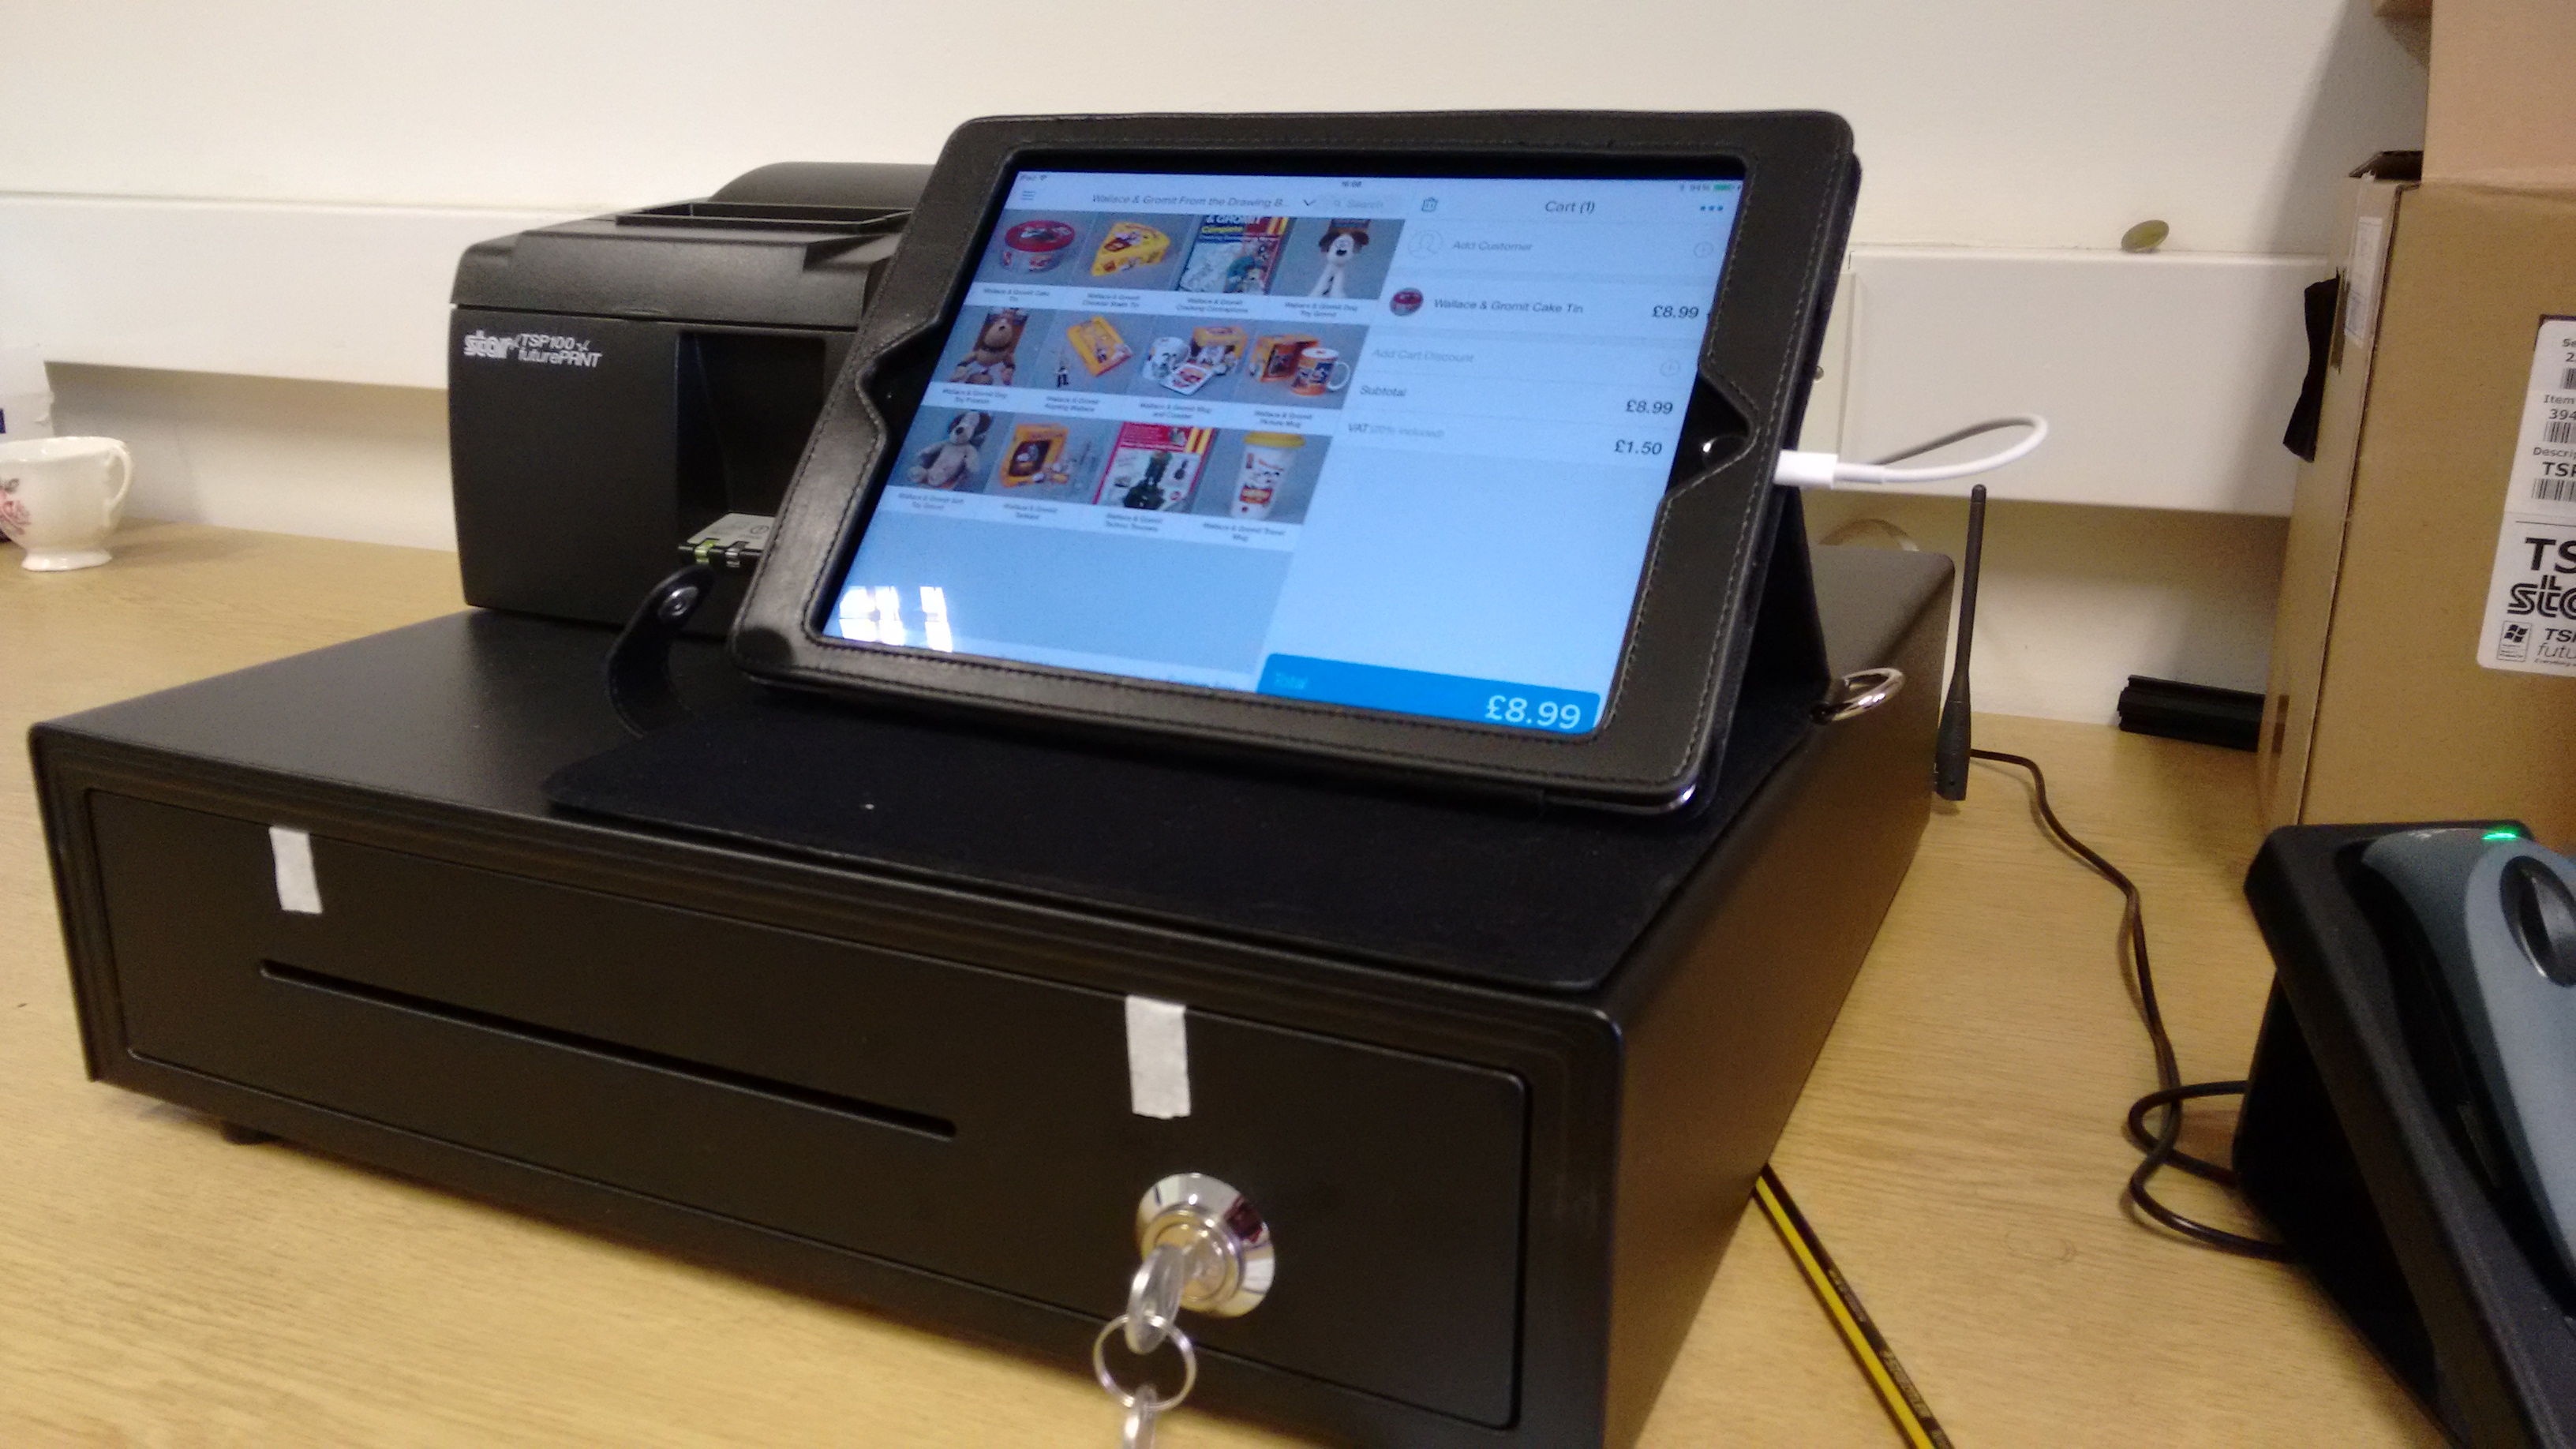 Photo of Shopify till - iPad, till and printer first use